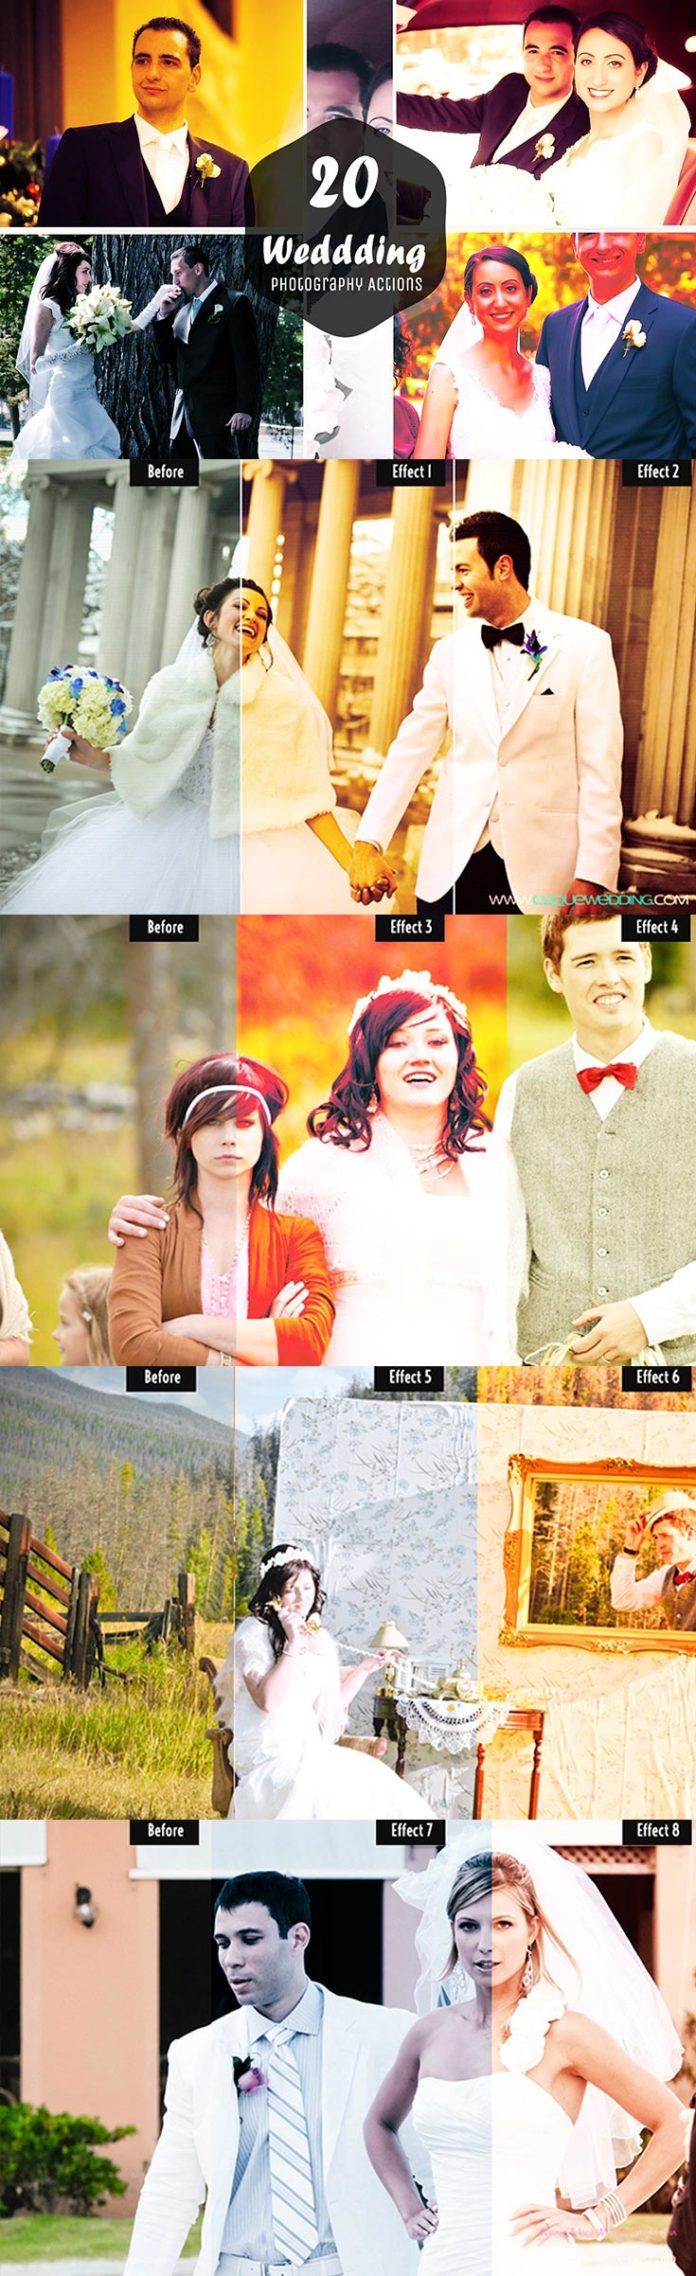 professional wedding photoshop actions free download